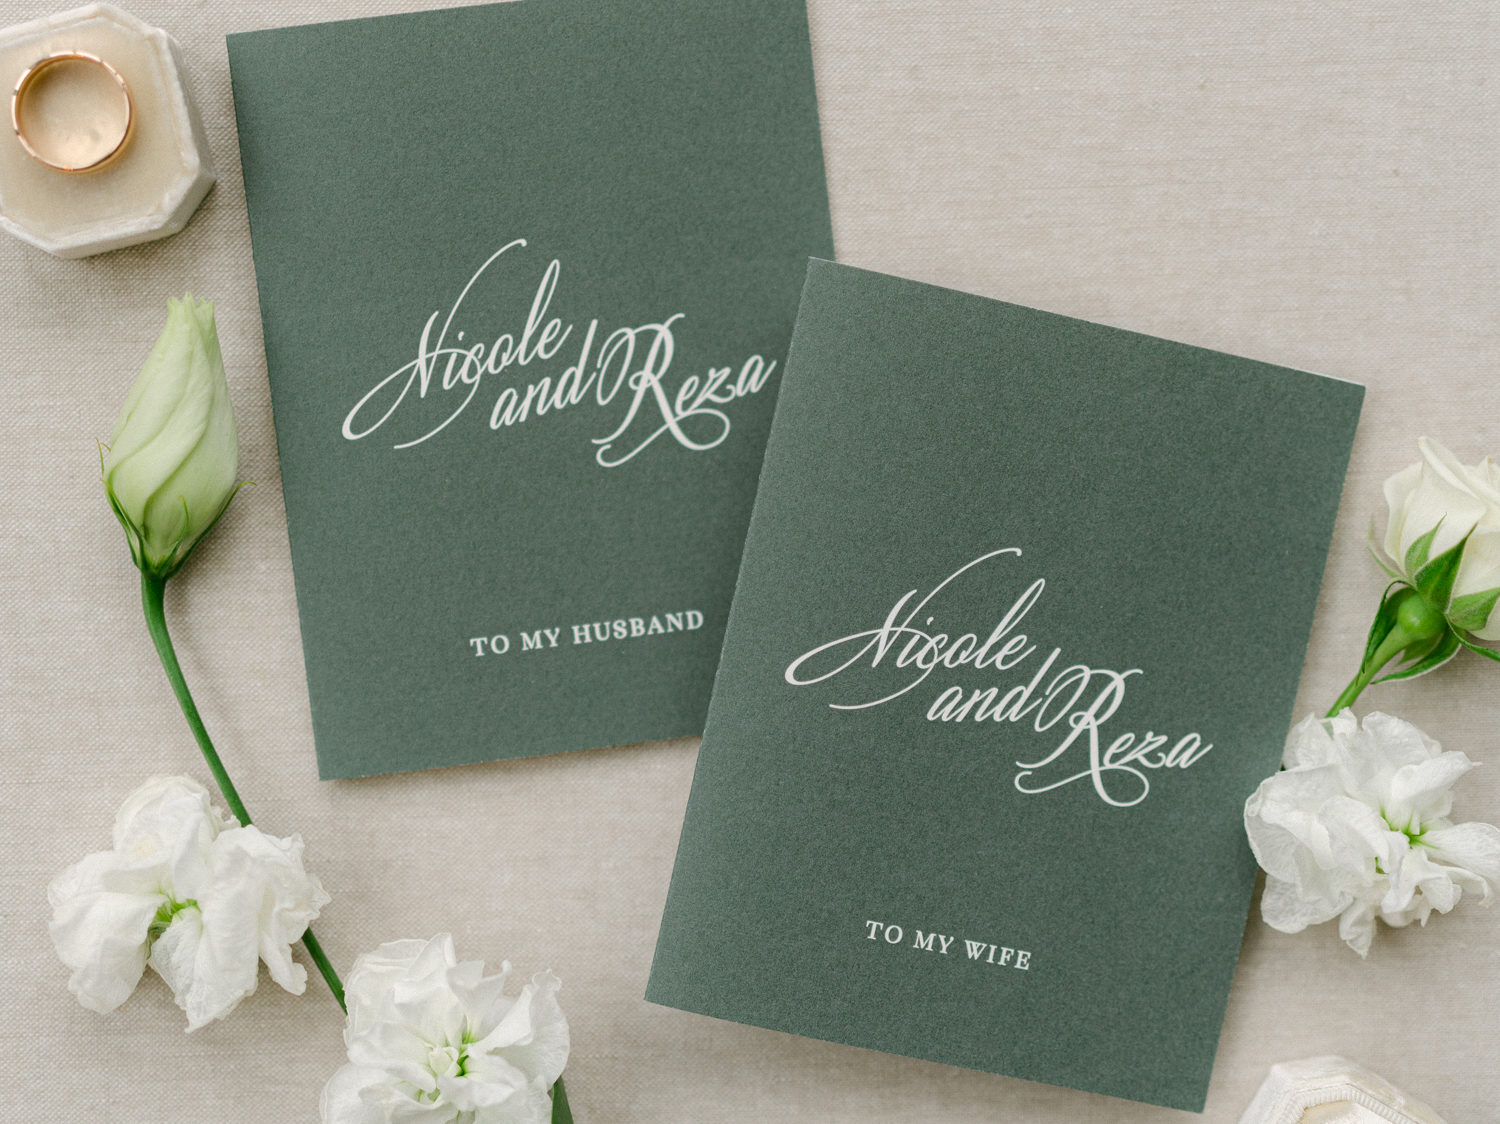 Personal Wedding Vow Books